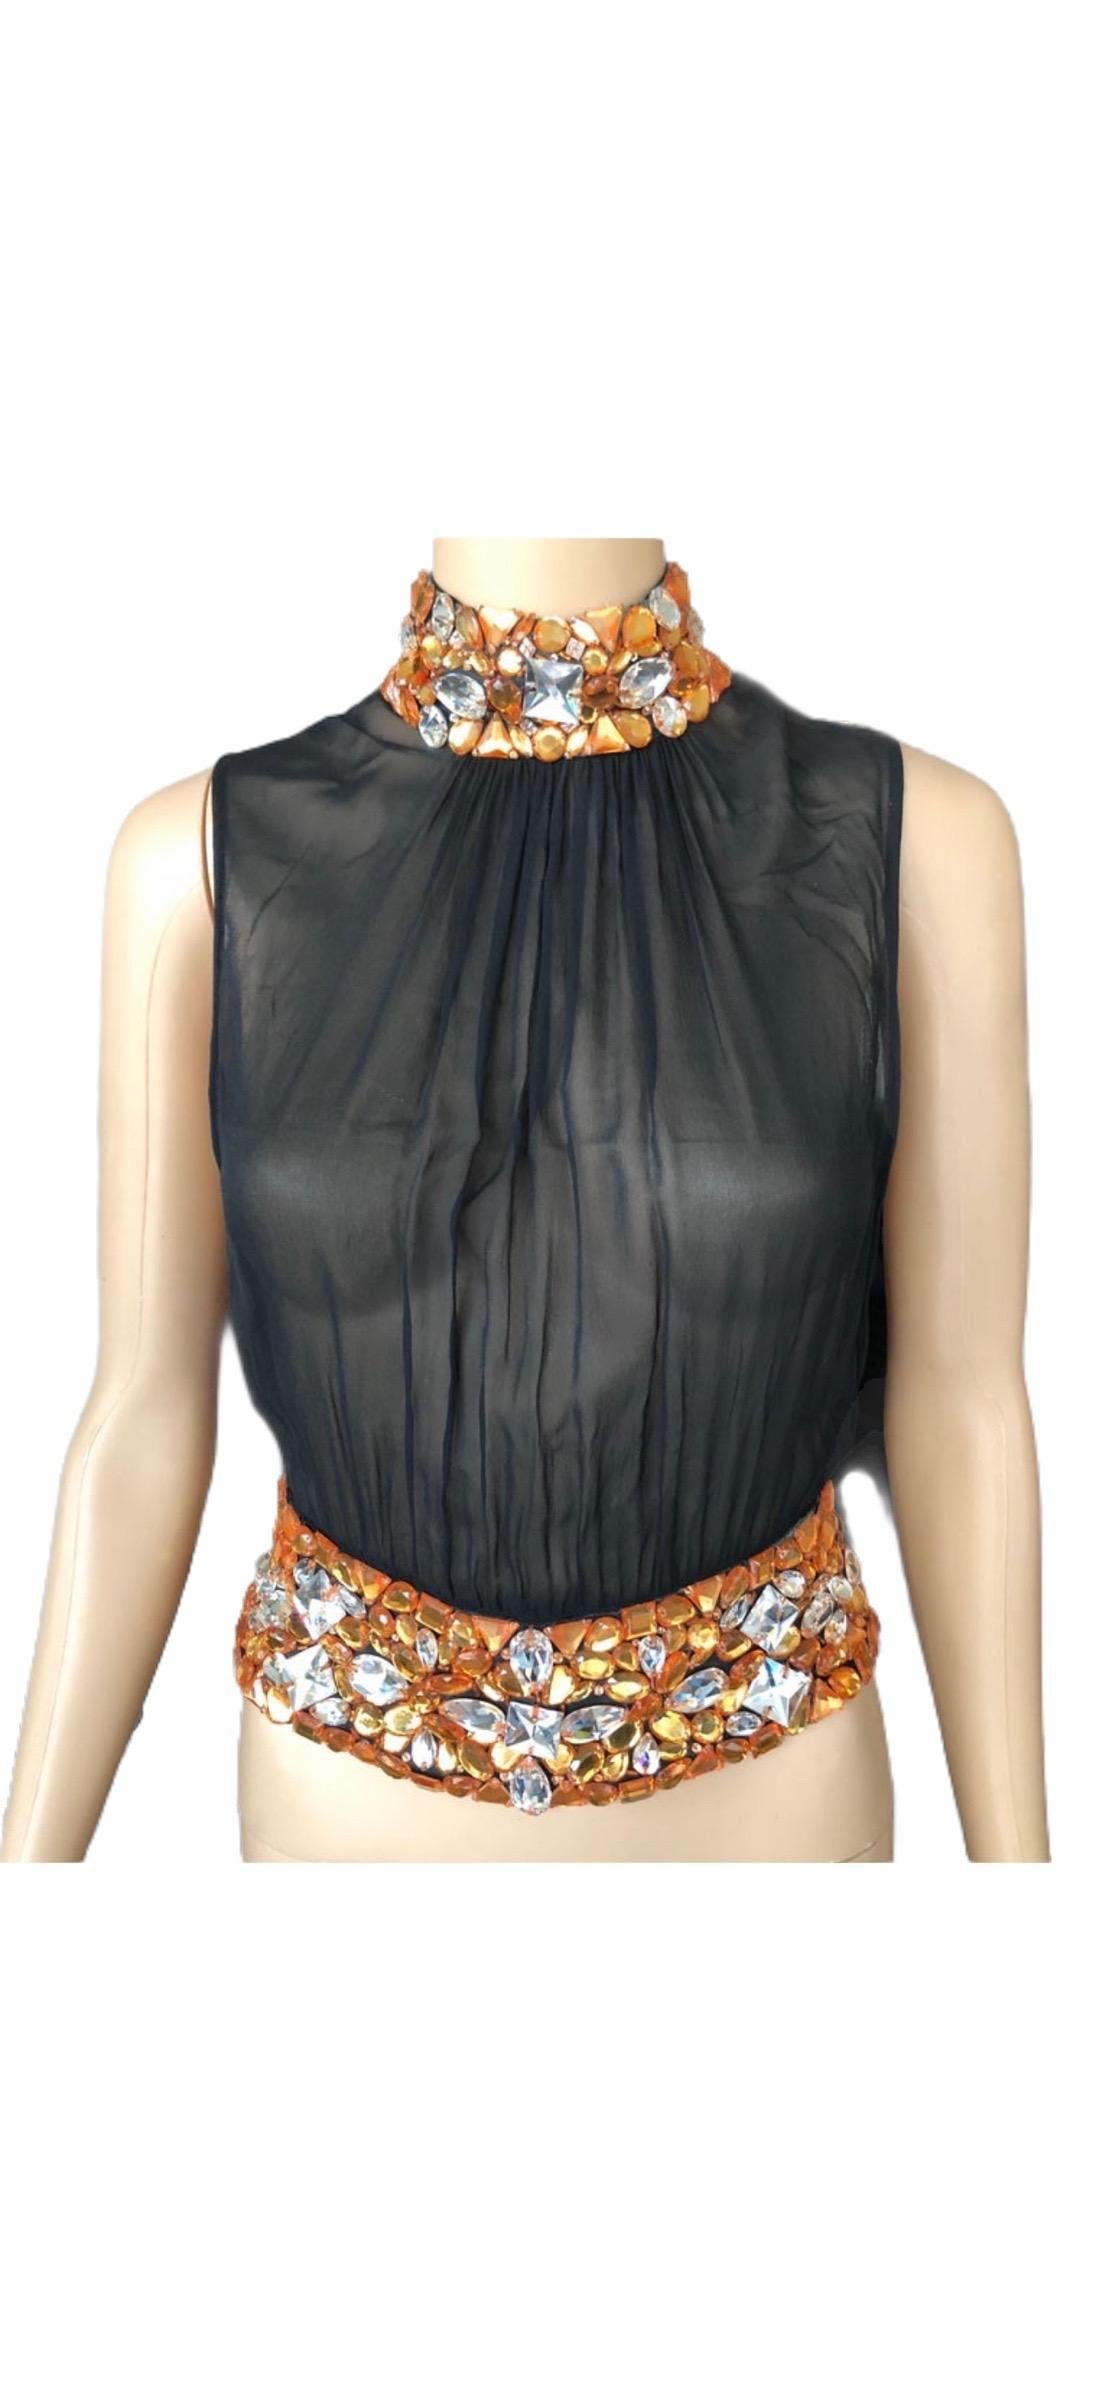 Gianni Versace Couture S/S 2000 Runway Embellished Sheer Top & Pants 2 Piece Set For Sale 10